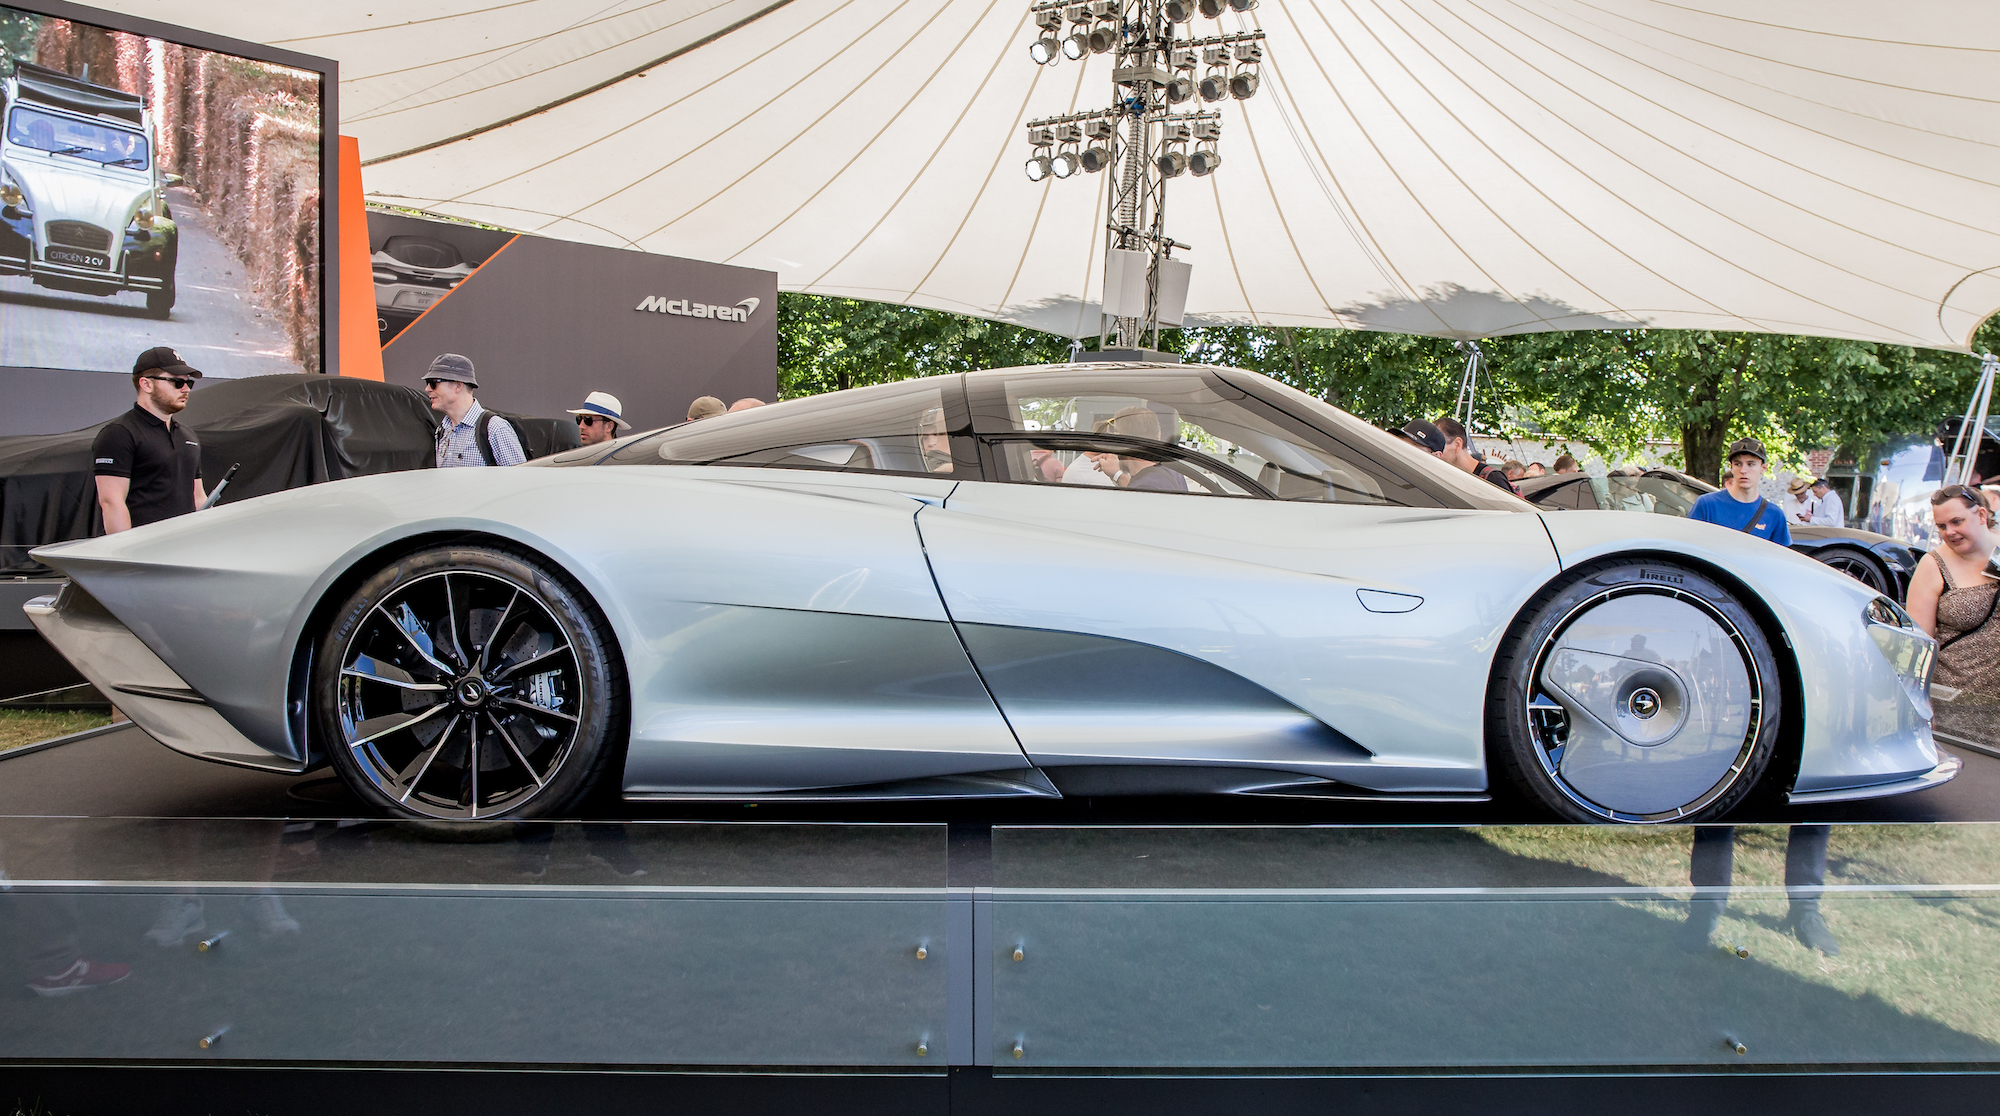 The McLaren Speedtail seen at Goodwood Festival of Speed 2019 on July 4 in Chichester, England.